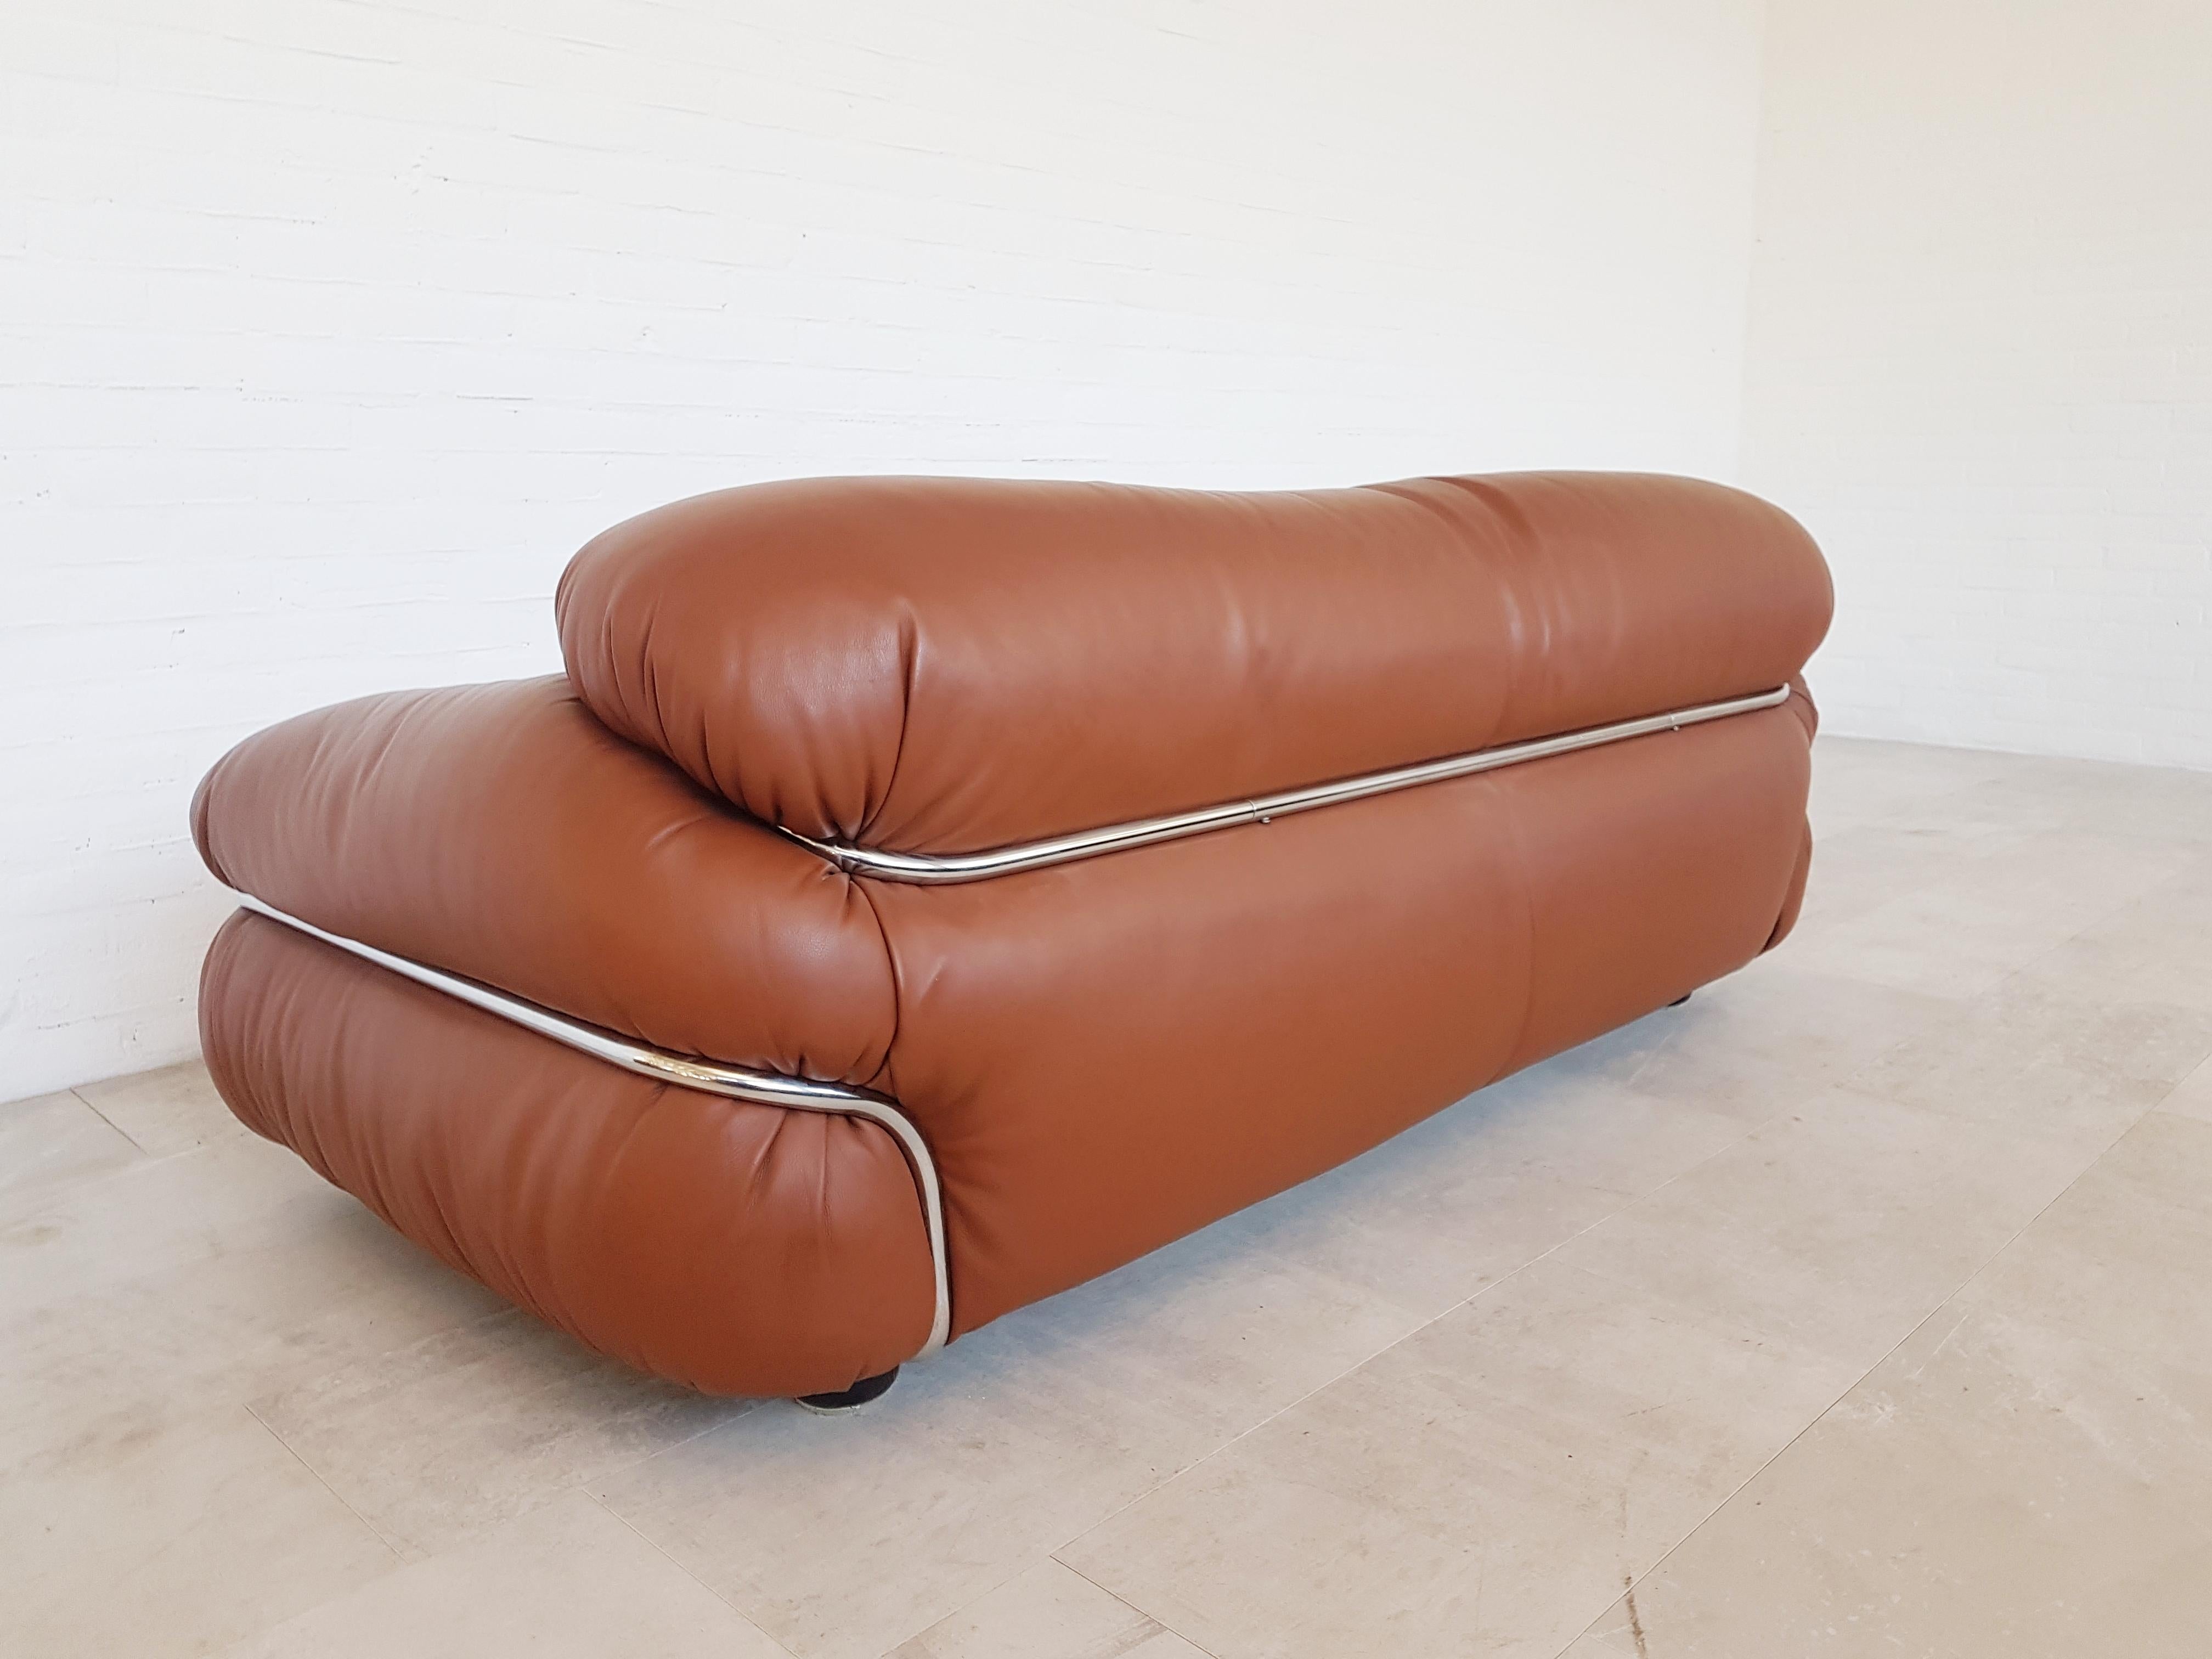 Gianfranco Frattini designed this awesome Space Age piece in the 1970s for Cassina. A sofa in cognac / whiskey colored leather and a chrome frame. Would fit well in a mad men inspired interior.